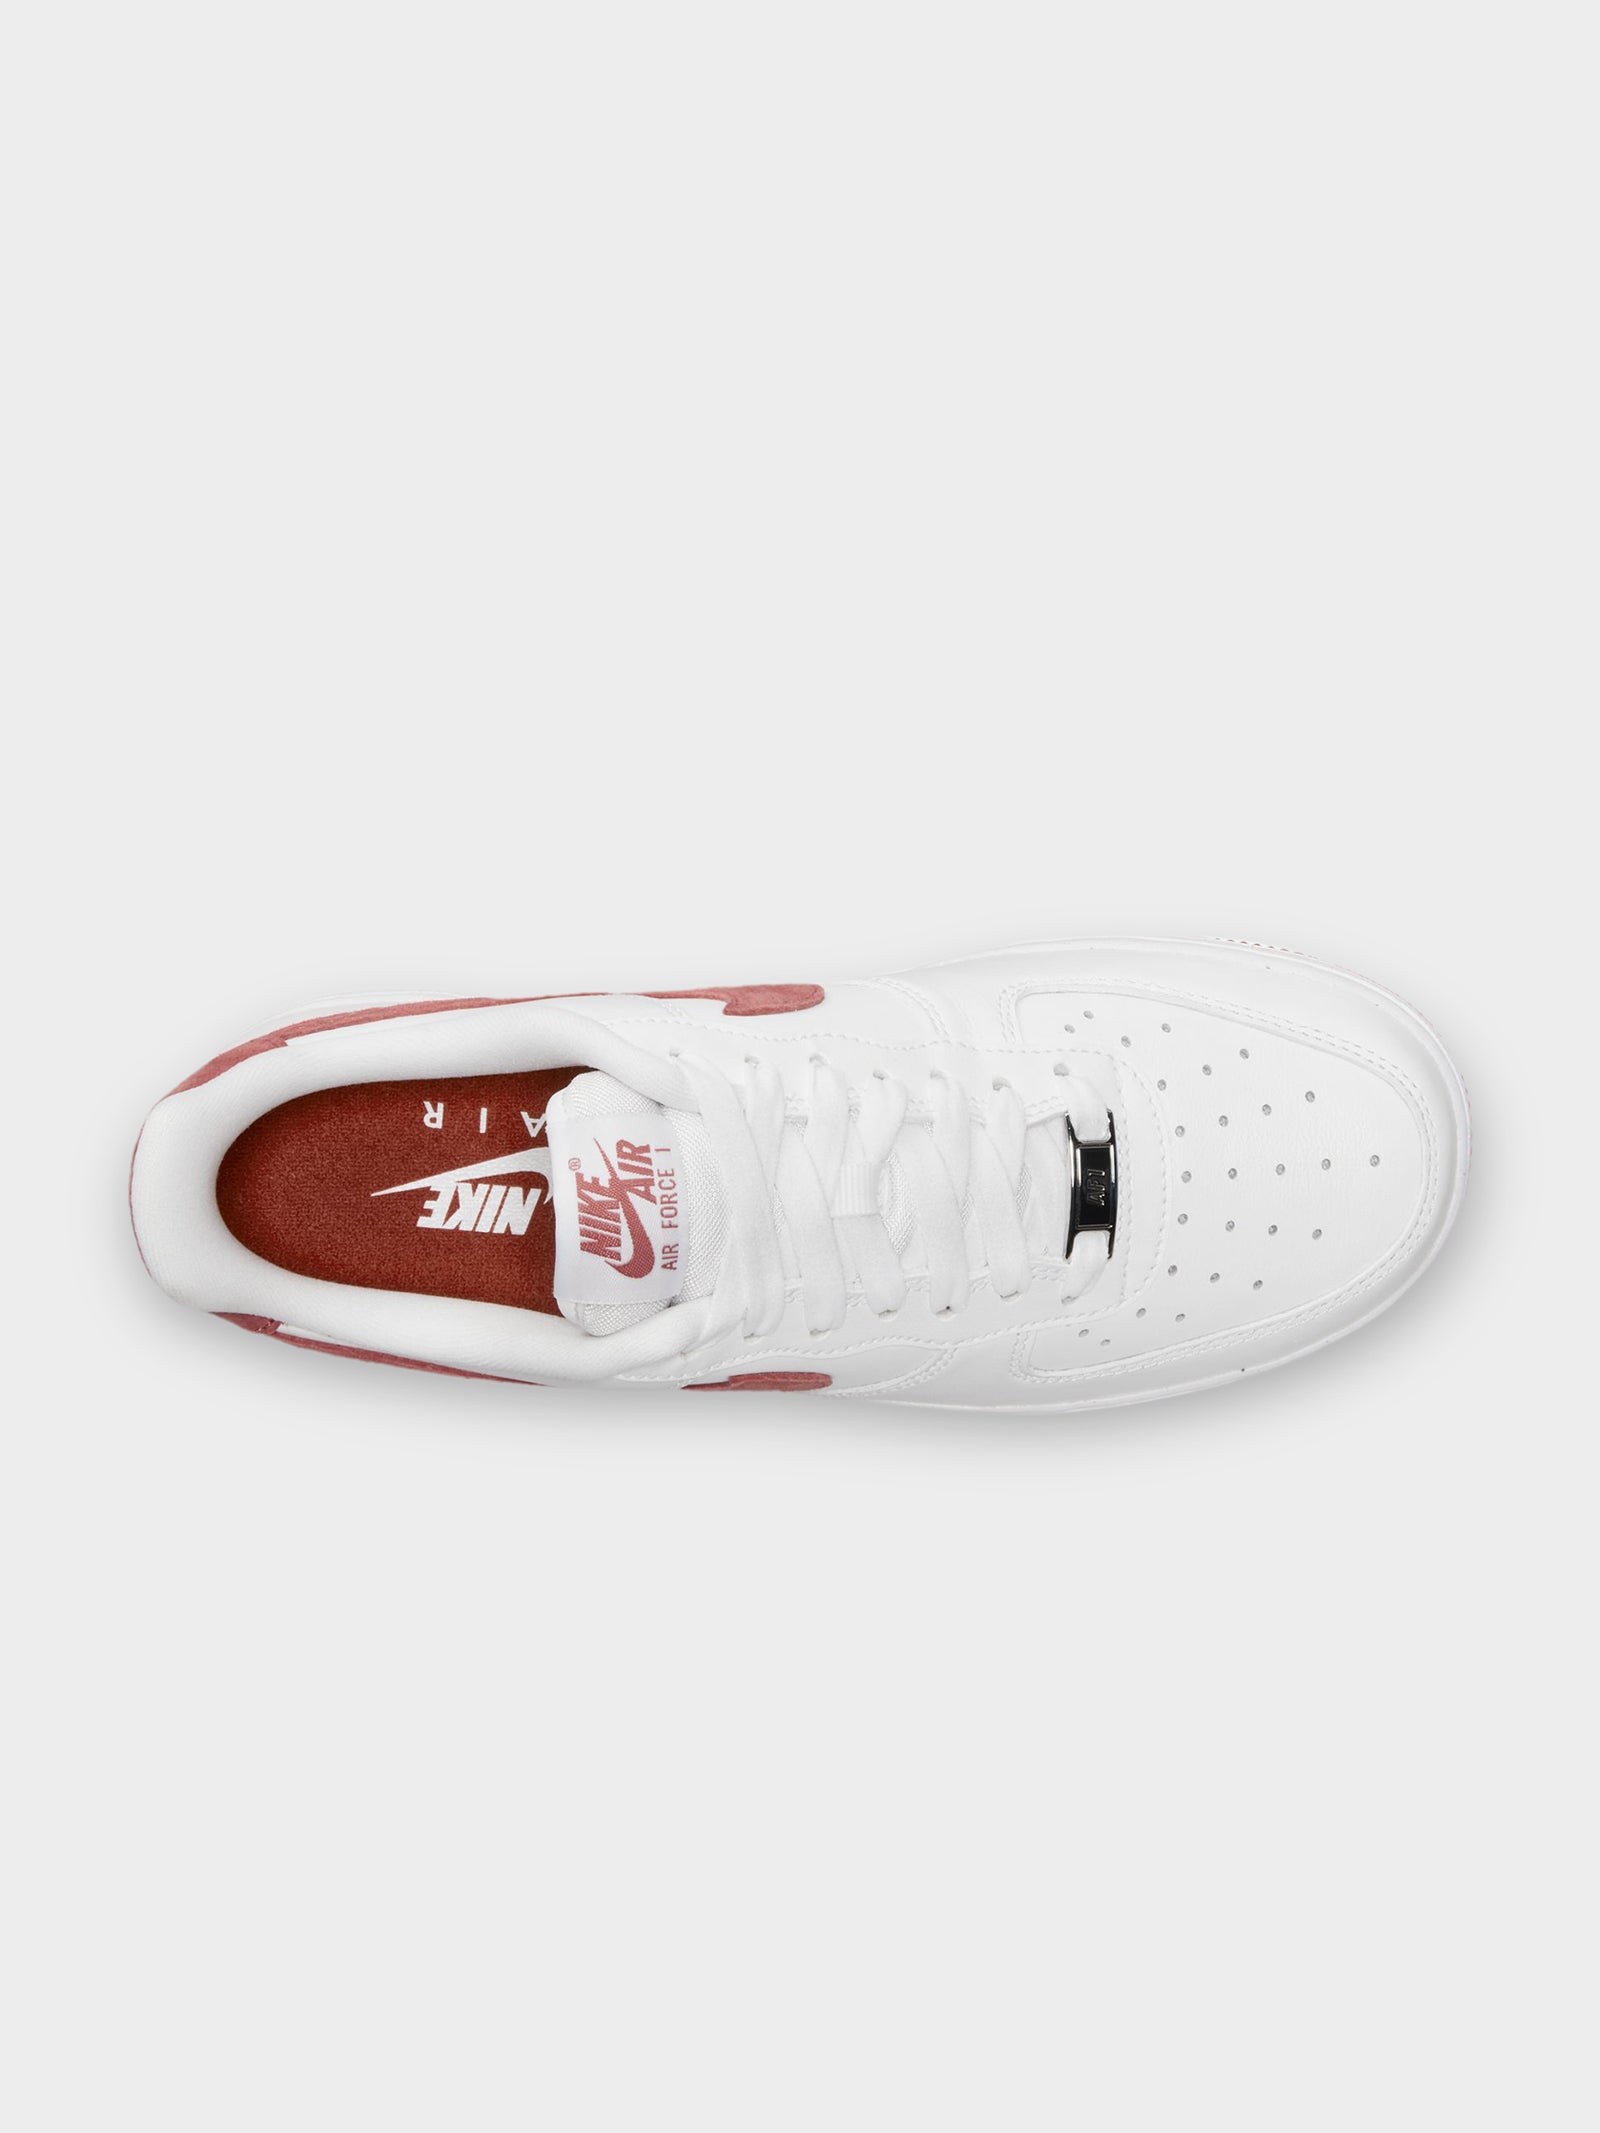 Womens Air Force 1 '07 Sneakers in White, Team Red & Dragon Red